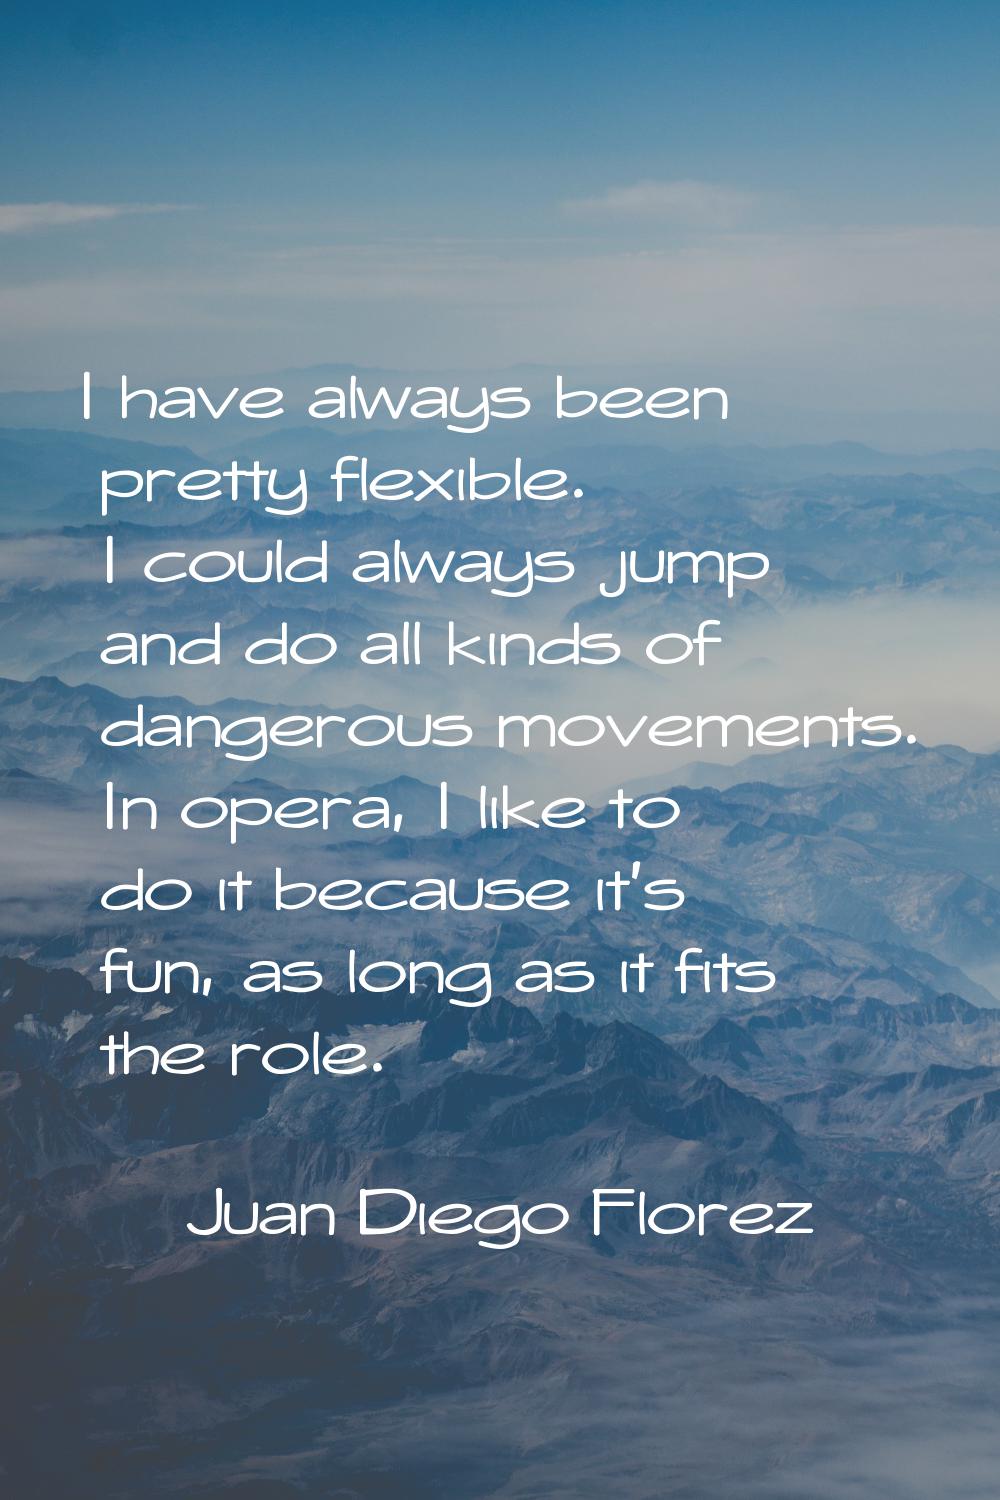 I have always been pretty flexible. I could always jump and do all kinds of dangerous movements. In